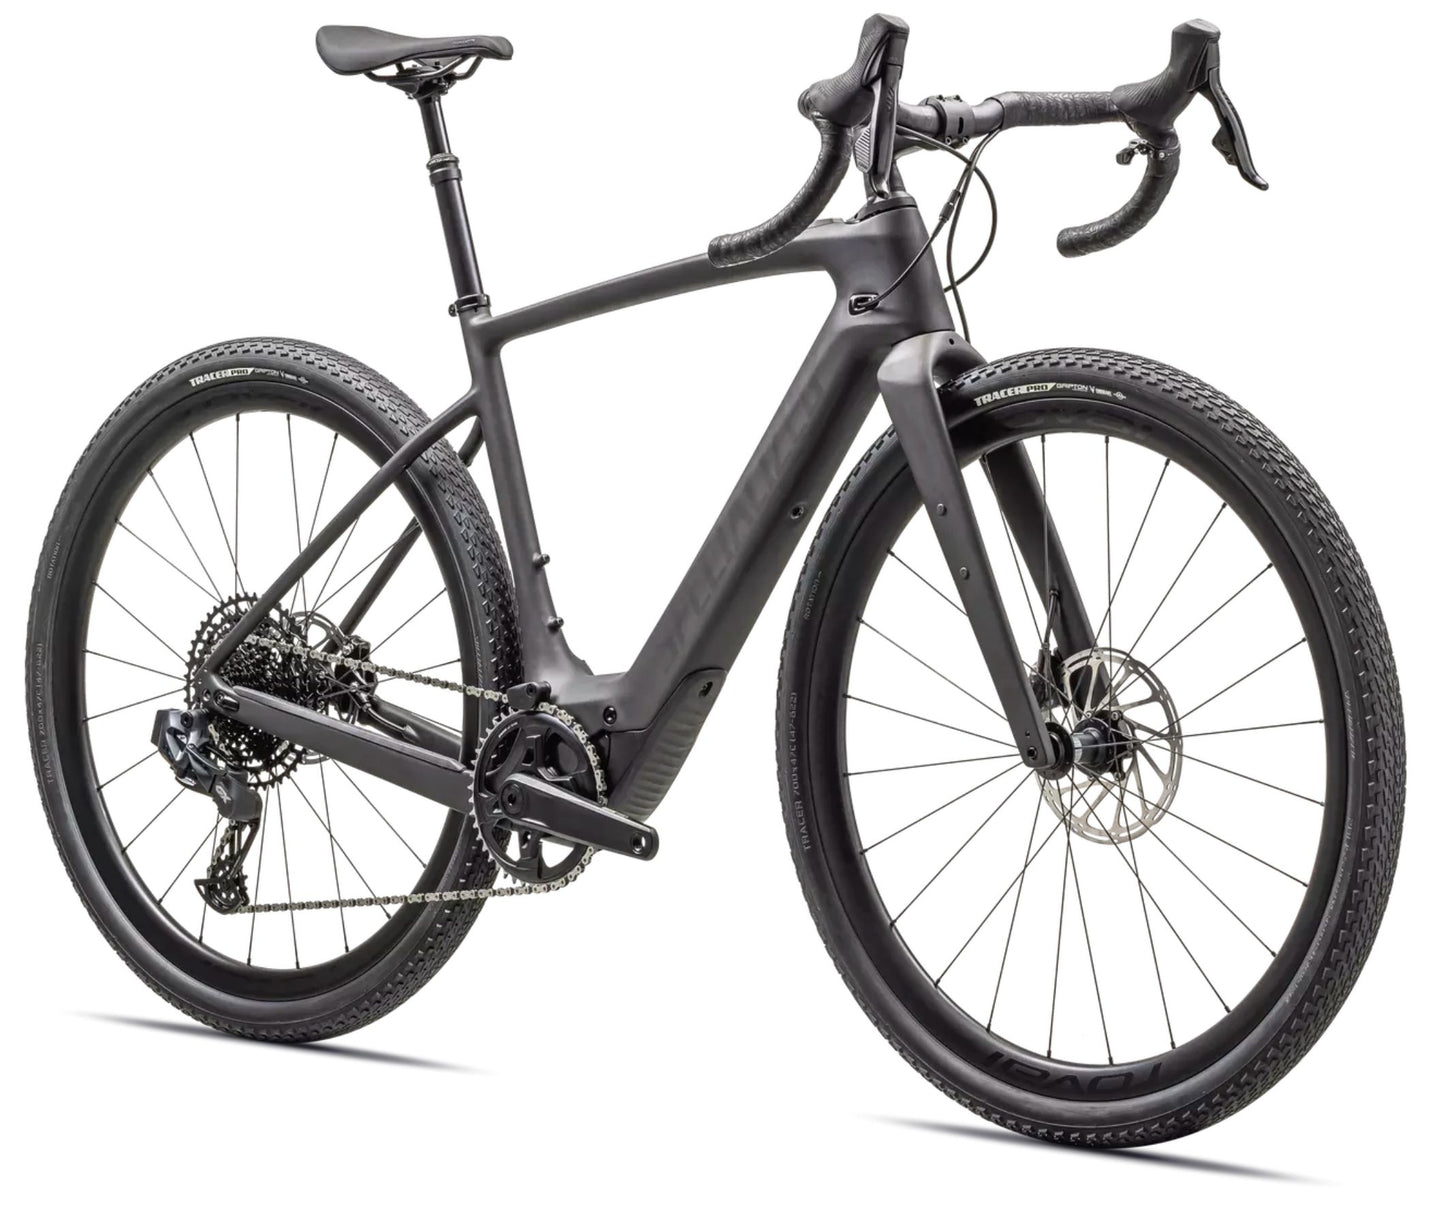 Specialized Turbo Creo 2 Metallic Obsidian Angled View